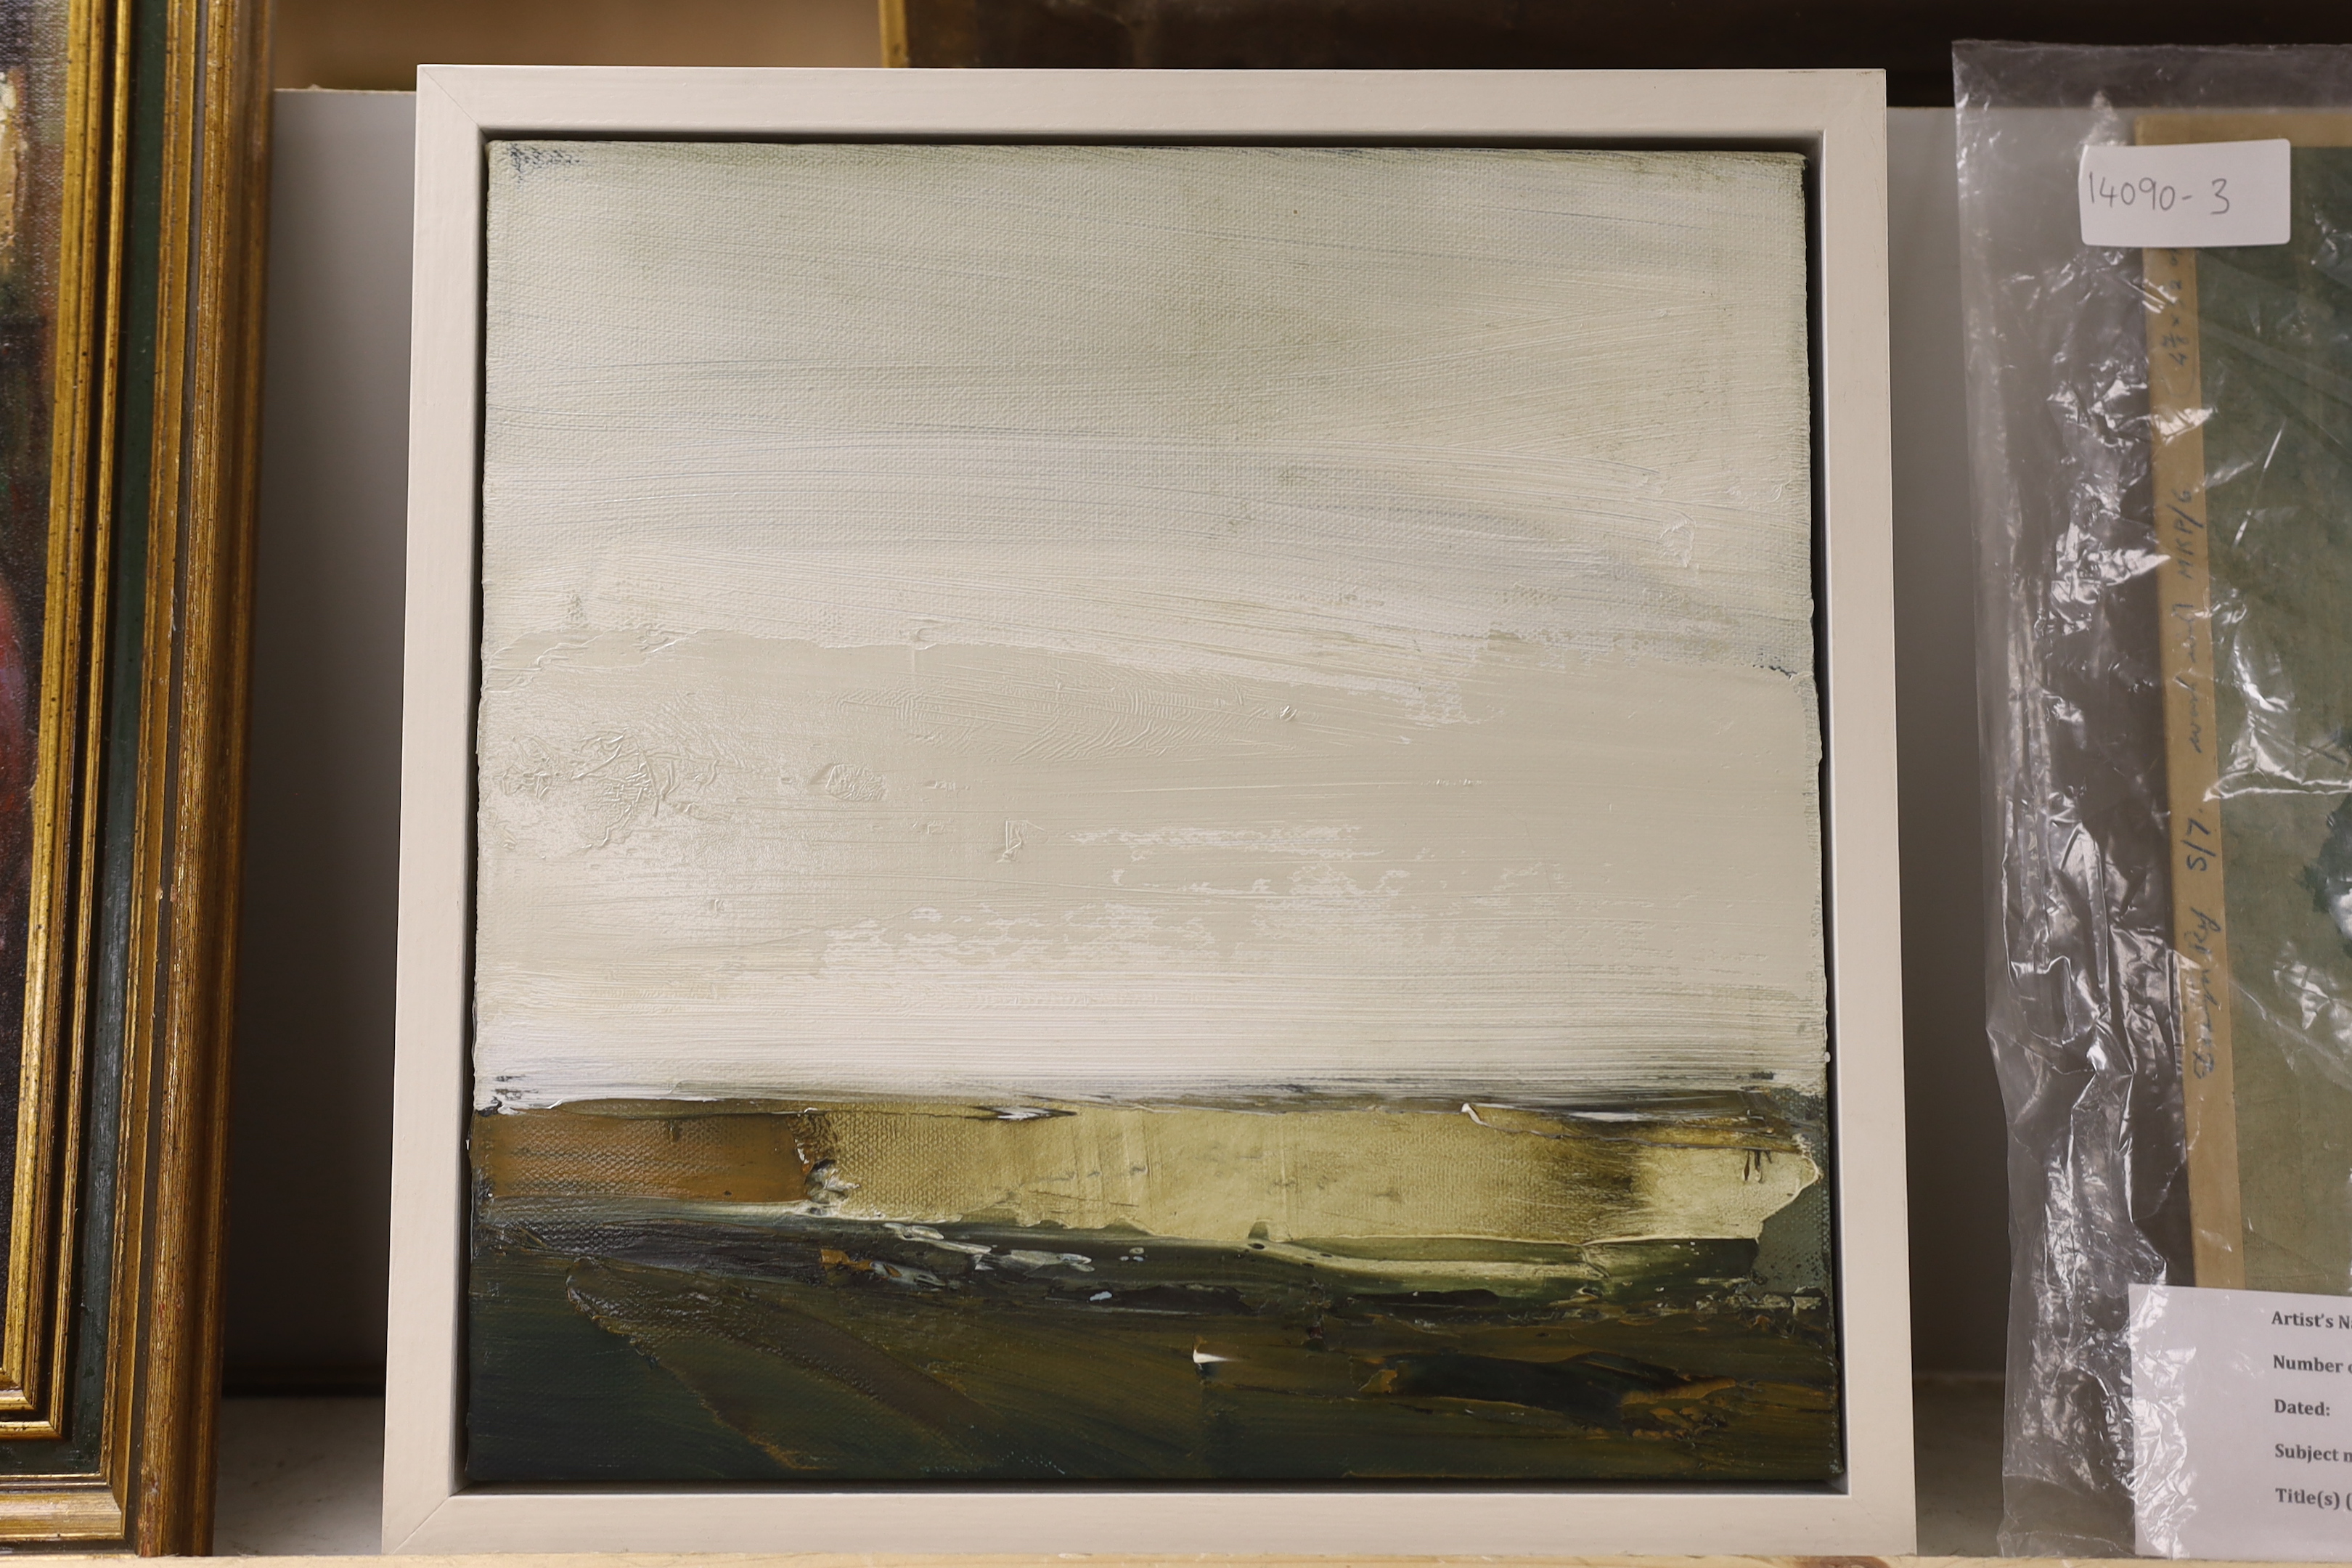 Dion Salvador Lloyd (Contemporary, local), abstract oil on canvas, ‘Quiet’, unsigned, inscribed verso, 30 x 30cm